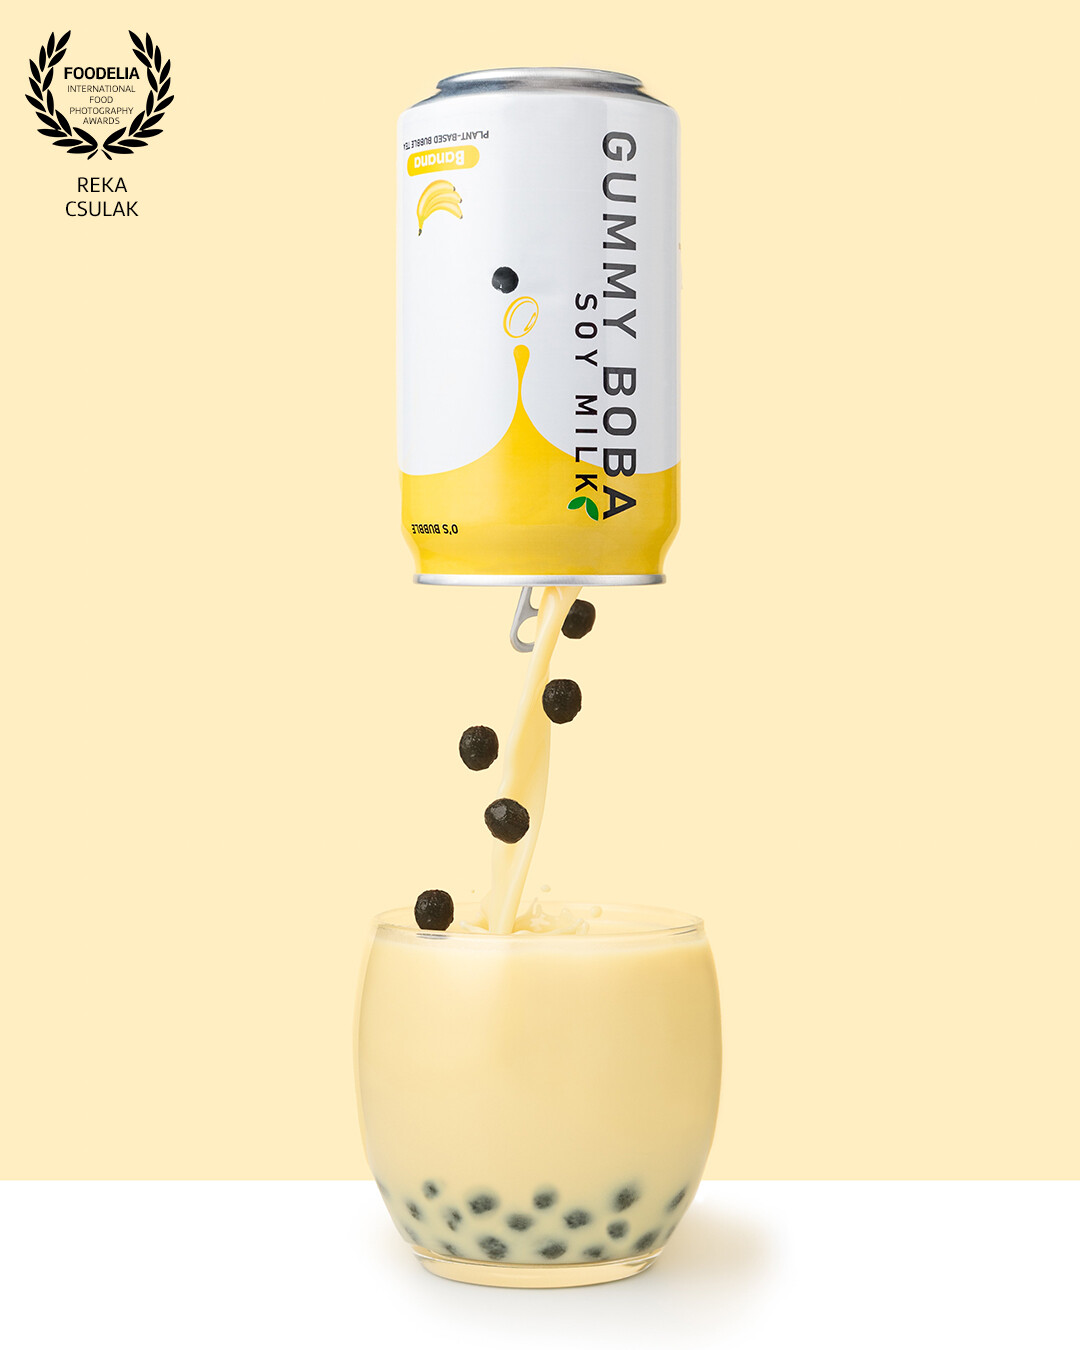 Banana boba drink product photo with monochromatic styling, unusual perspective and some action incorporated.